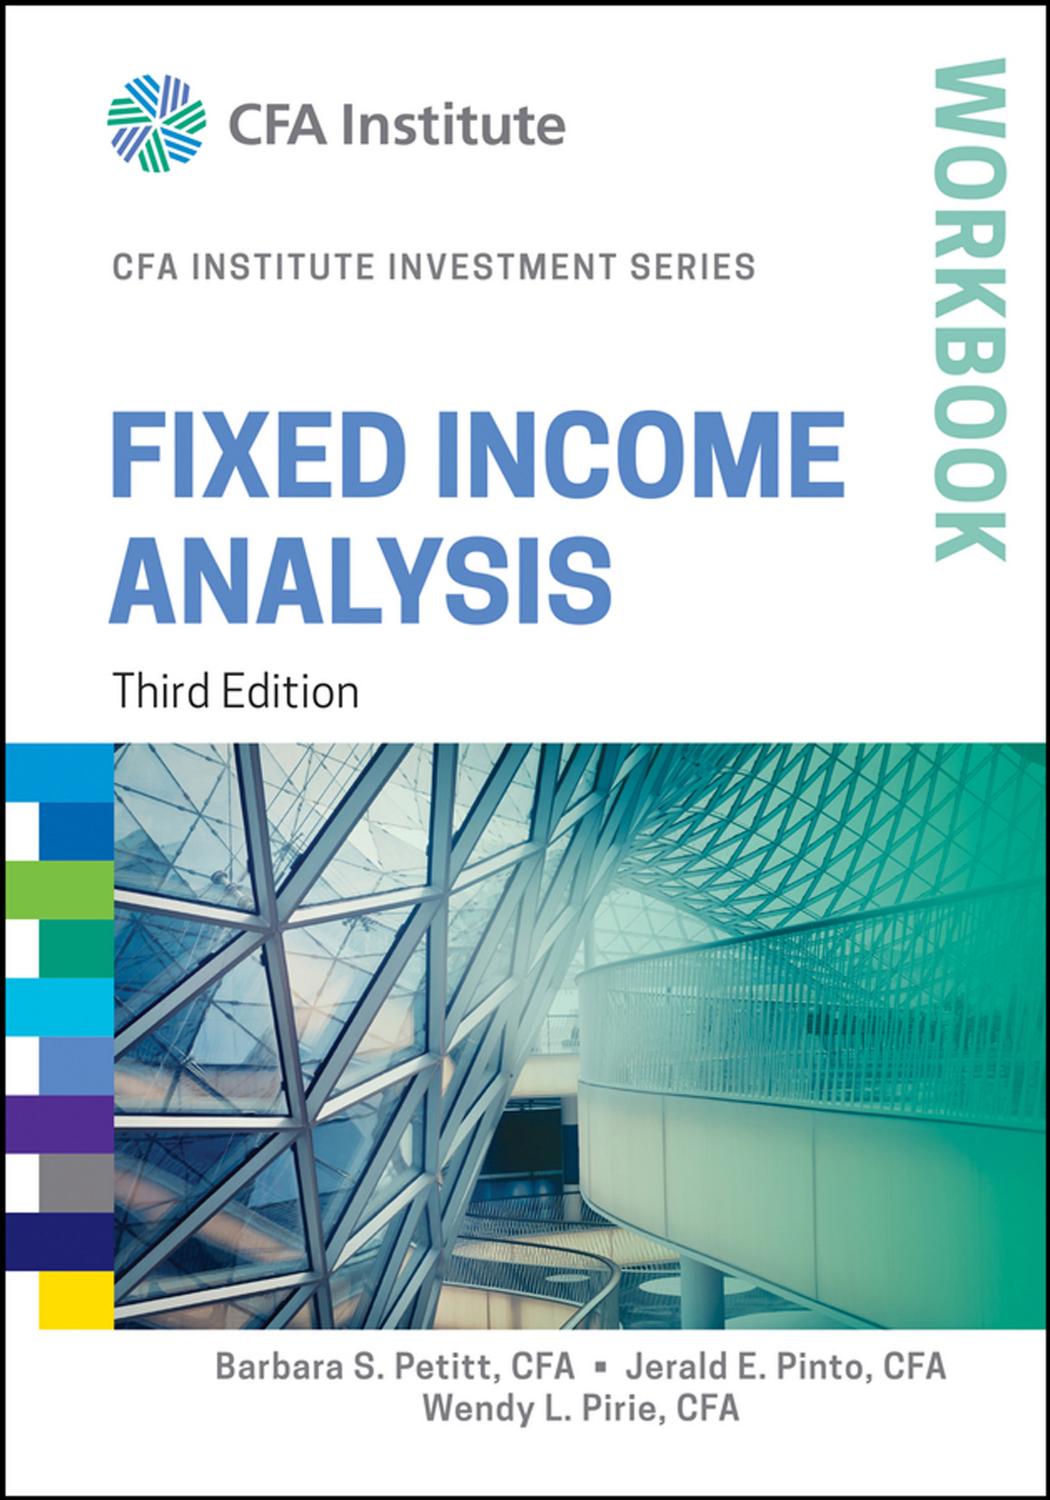 Fixed Income Analysis Workbook 3rd Edition(CFA Institute Investment Series) - Jerald E. Pinto.jpg